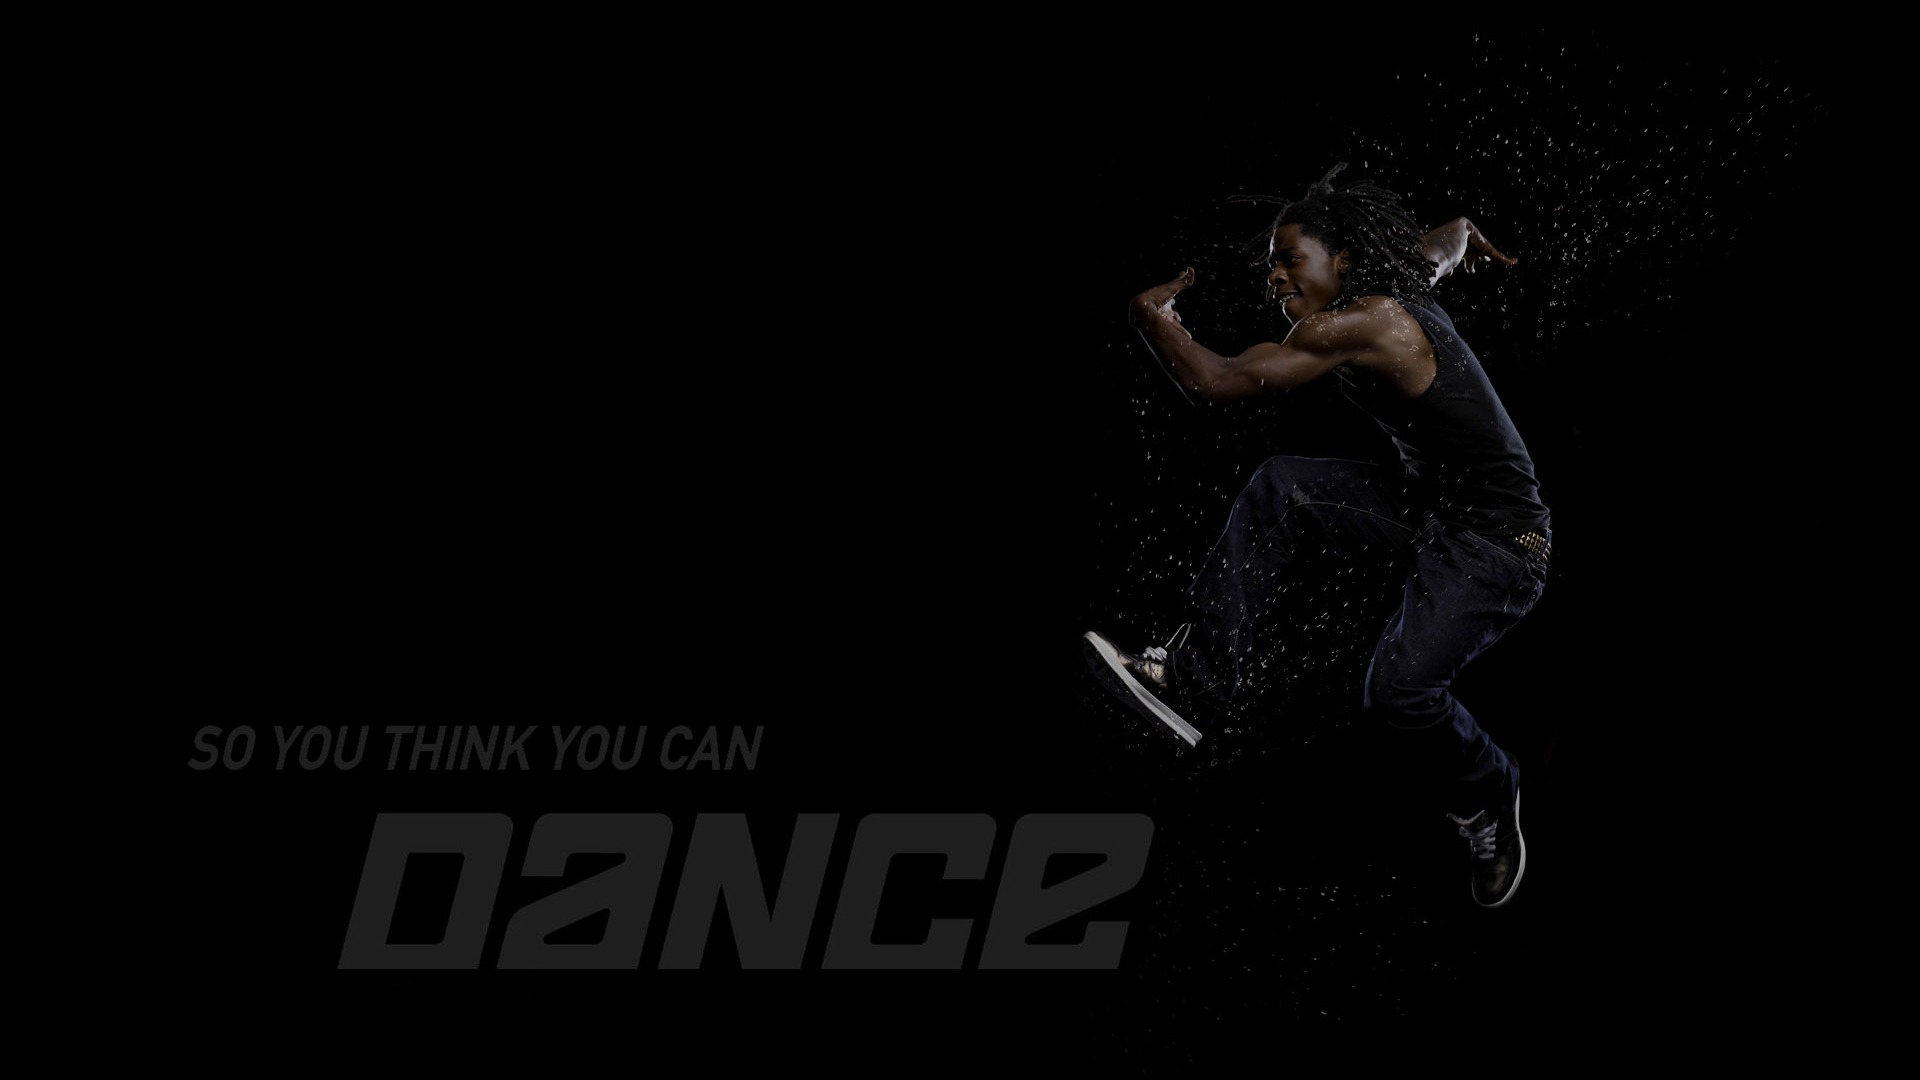 So You Think You Can Dance wallpaper (2) #16 - 1920x1080